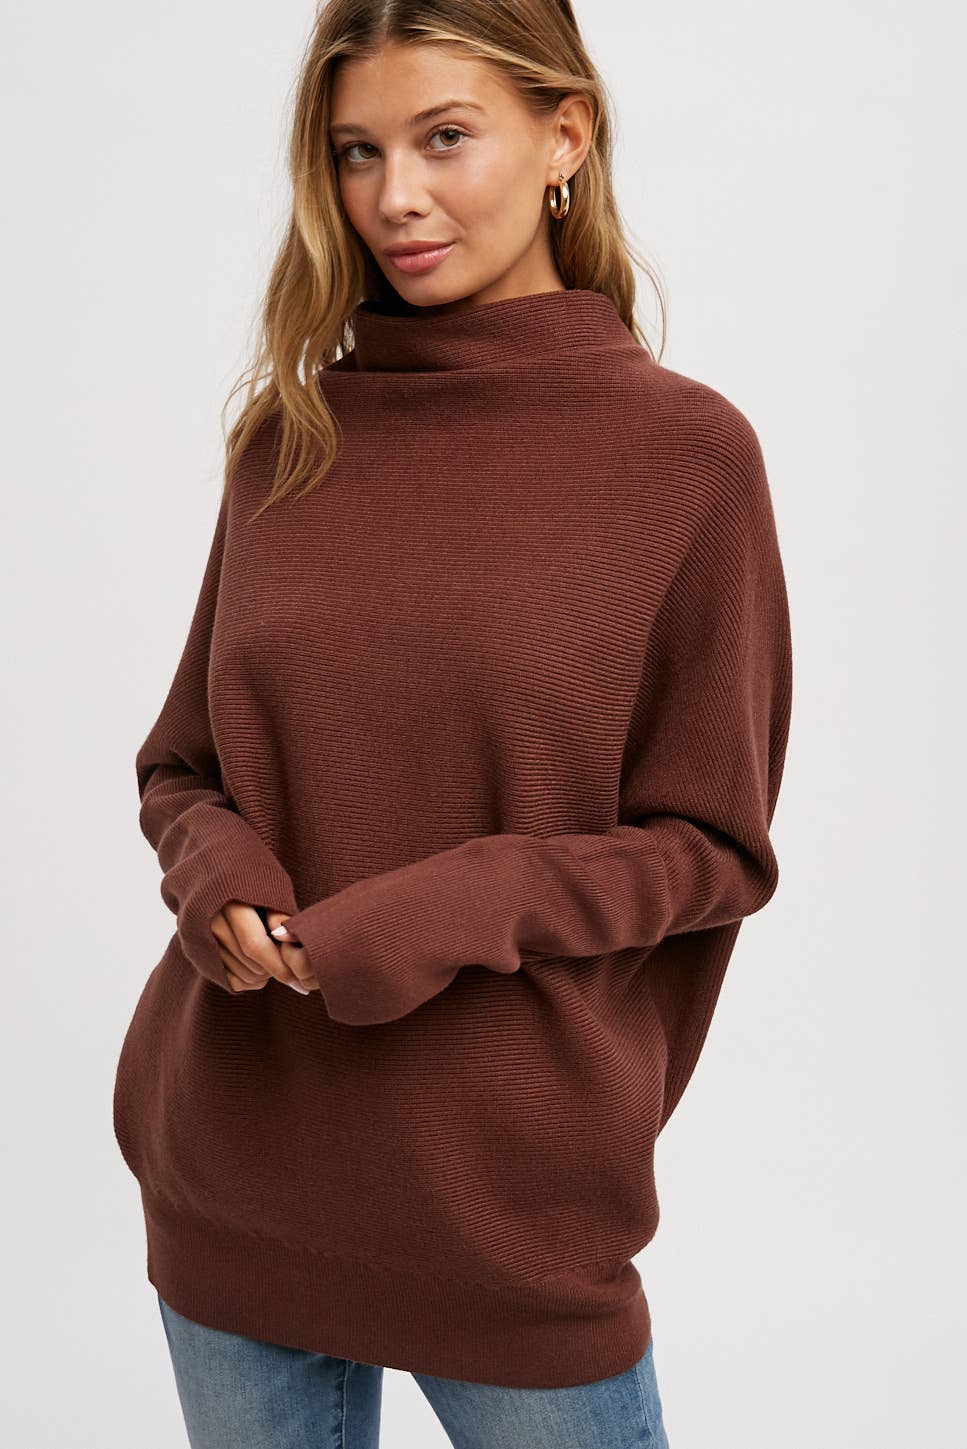 Bluivy - Slouch Neck Dolman Pullover - Chocolate